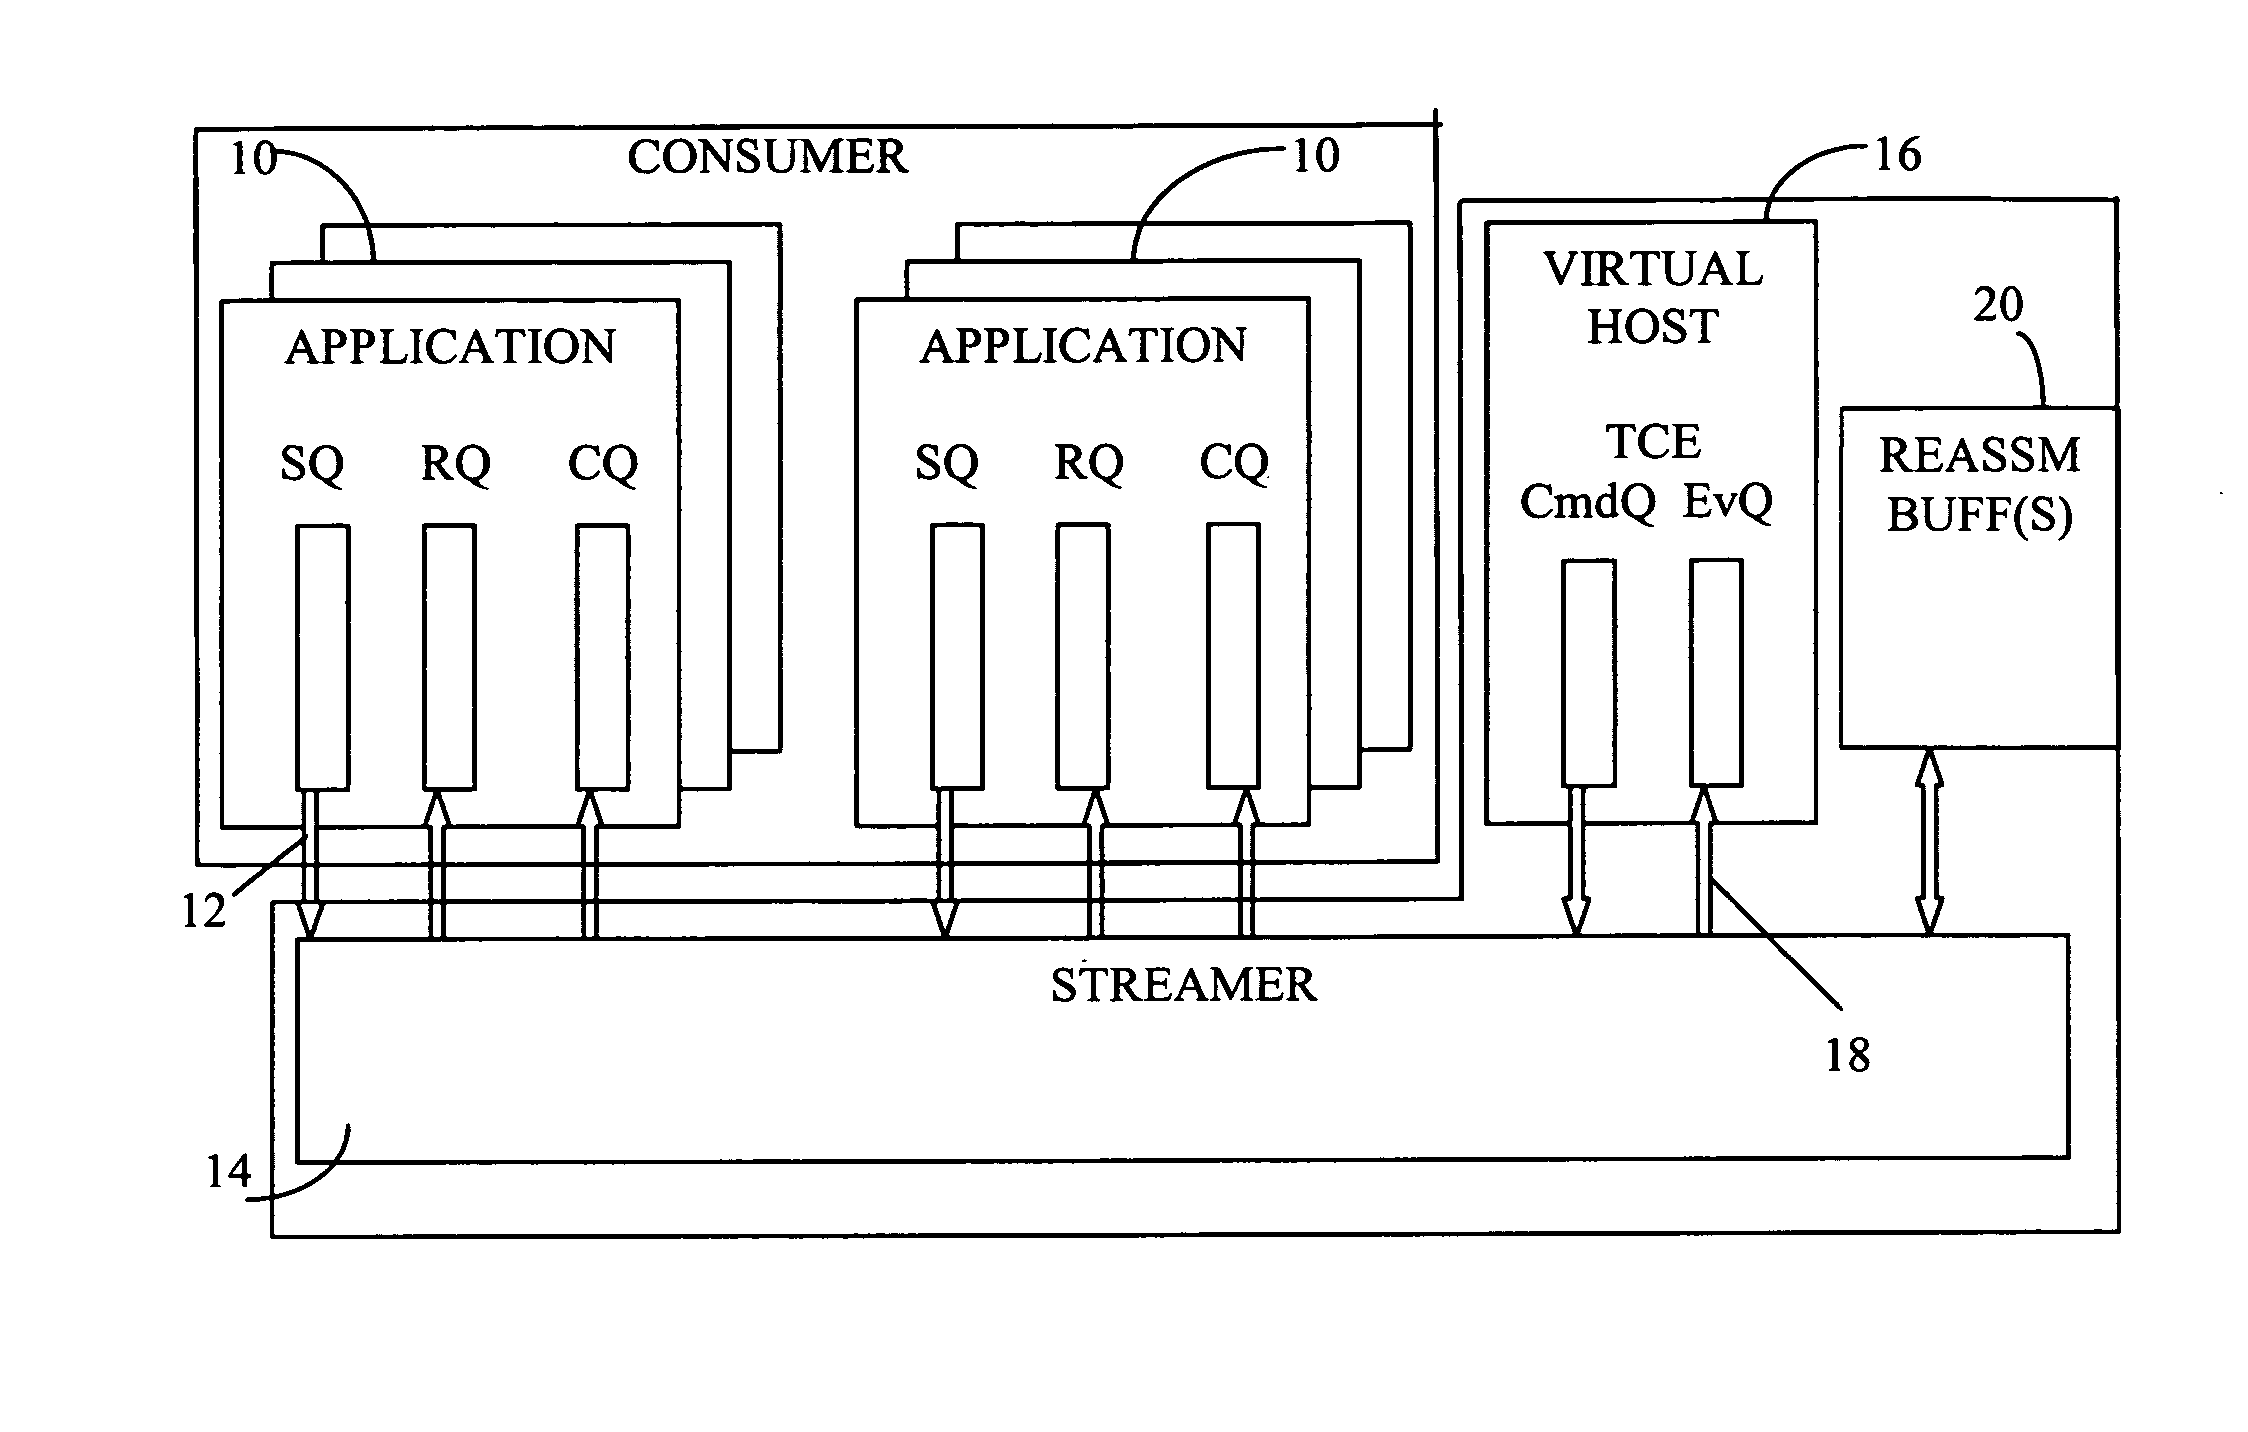 Asynchronous dual-queue interface for use in network acceleration architecture